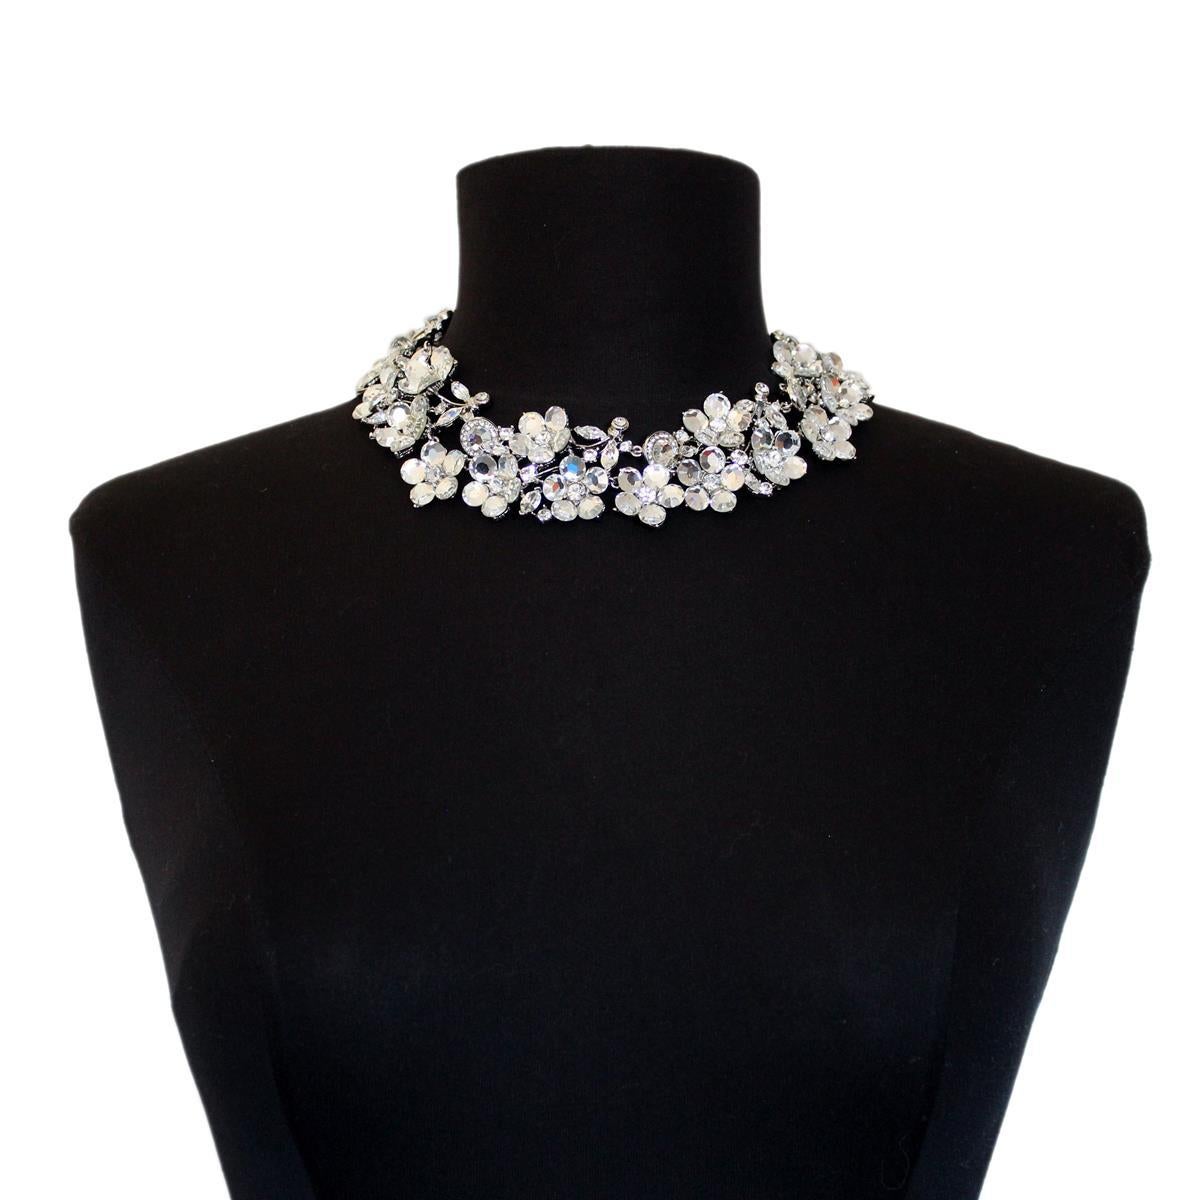 Stunning fancy piece by Carlo Zini Milano
Vintage
Non allergenic rhodium
Amazing creation of crystals and rhinestones
100% Artisanal work
Made in Milano
Worldwide express shipping included in the price !